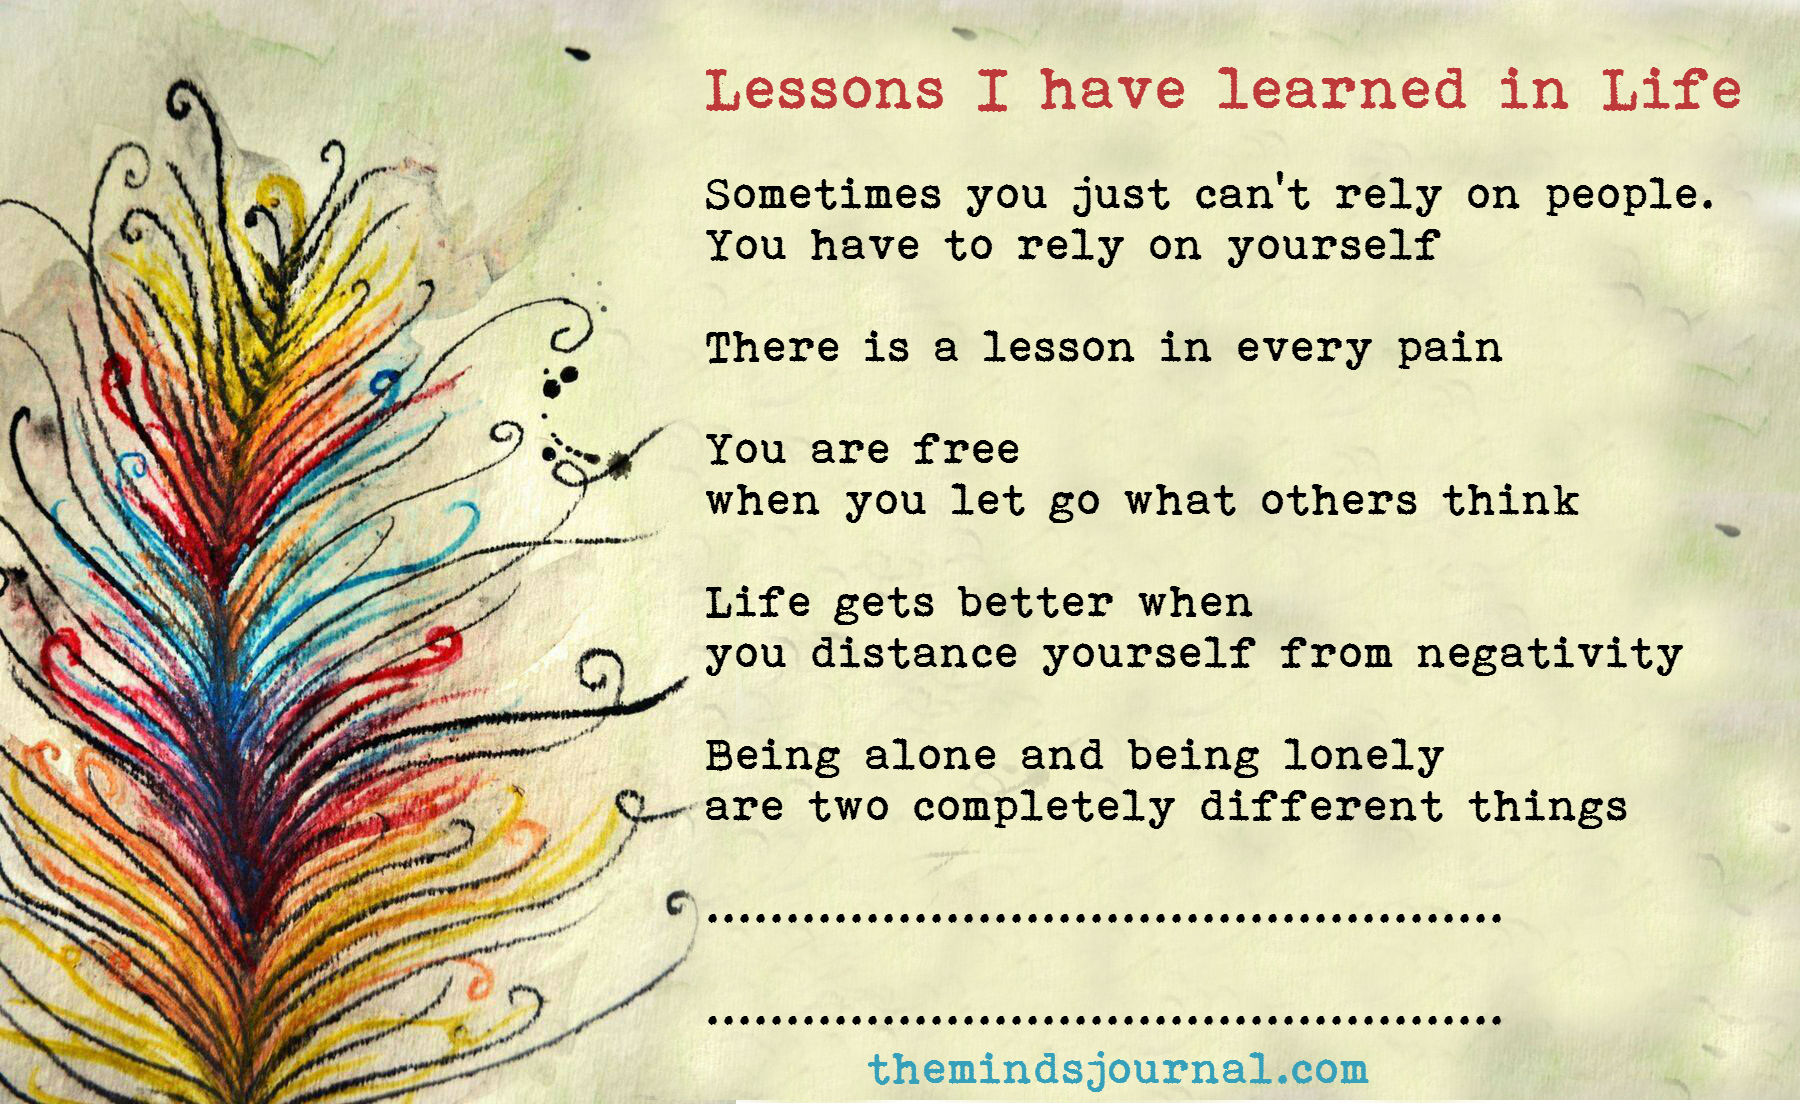 Lessons learned in Life